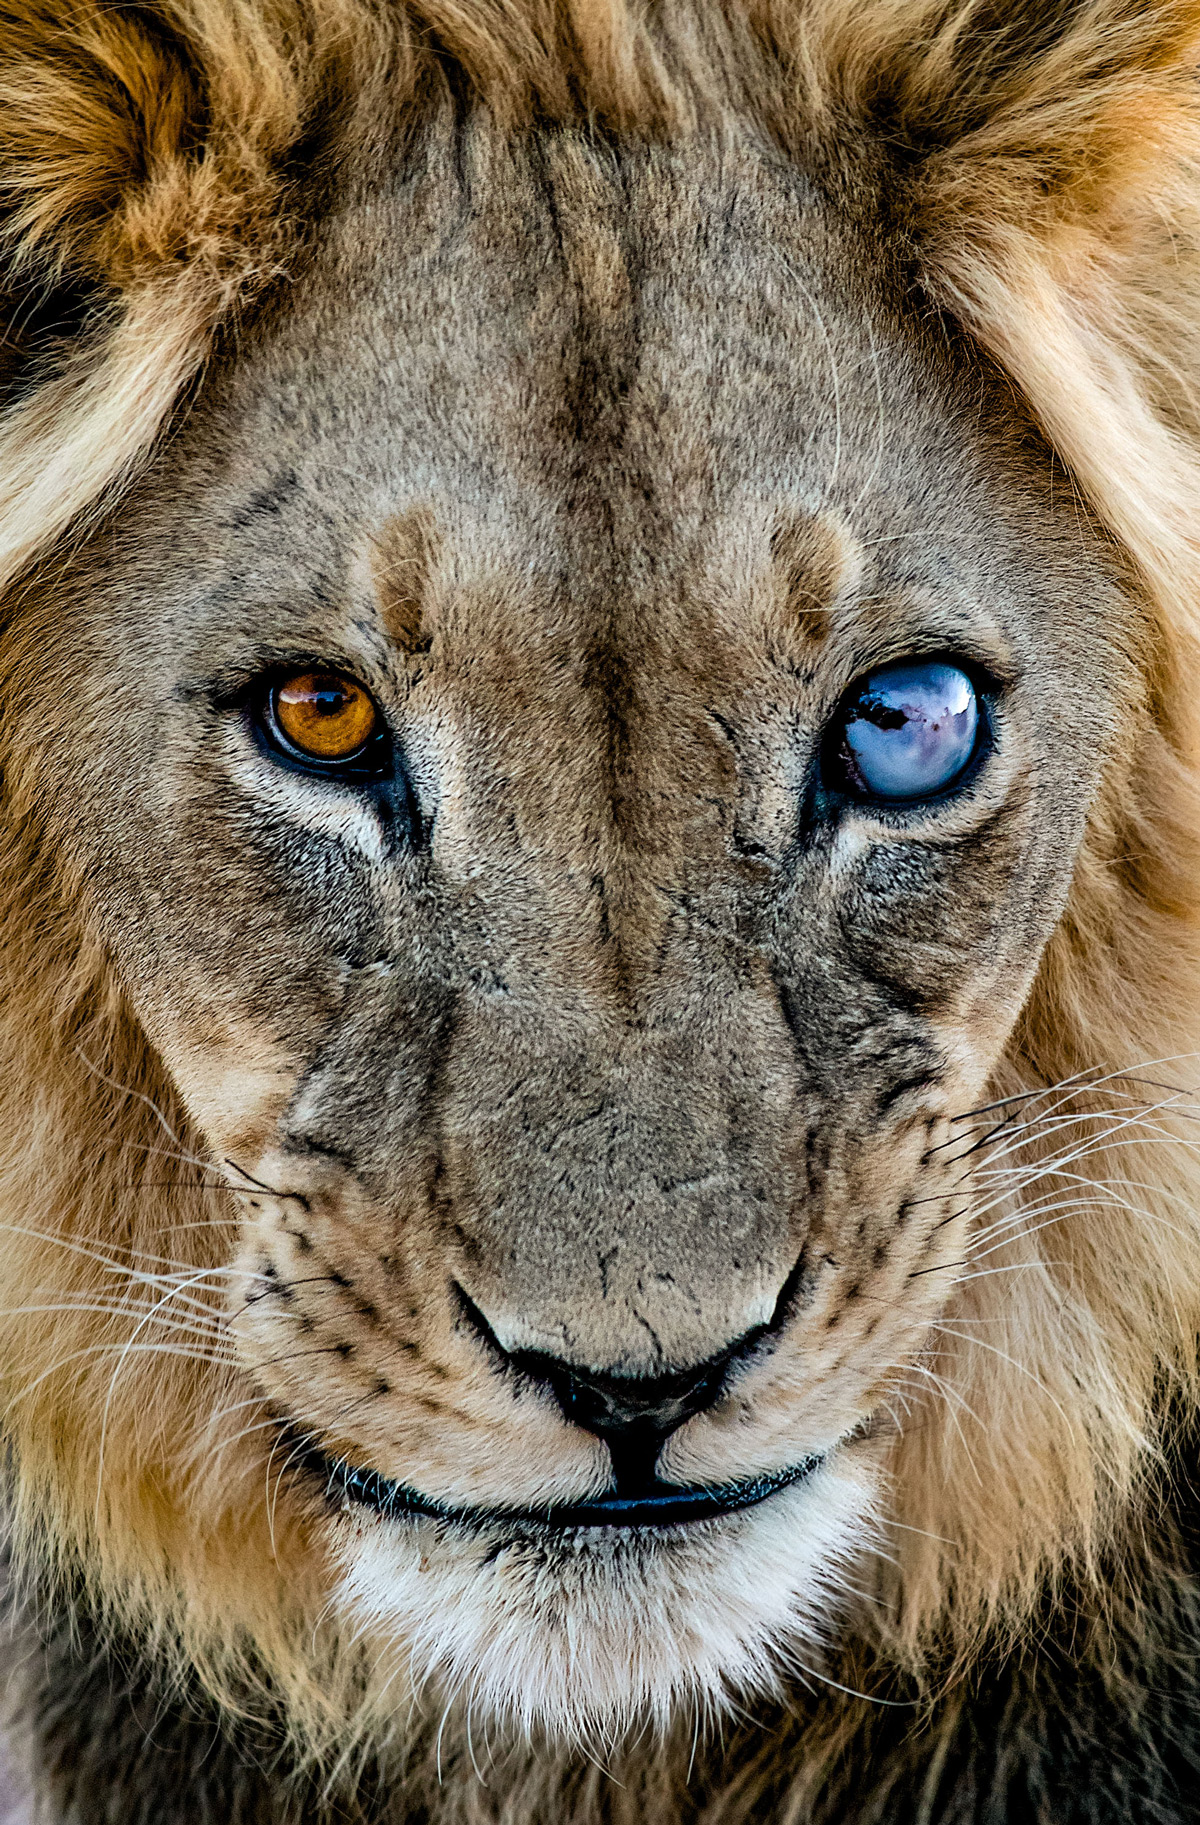 "Sun and moon" – a lion, blind in one eye, in Kgalagadi Transfrontier Park, South Africa © Ernest Porter